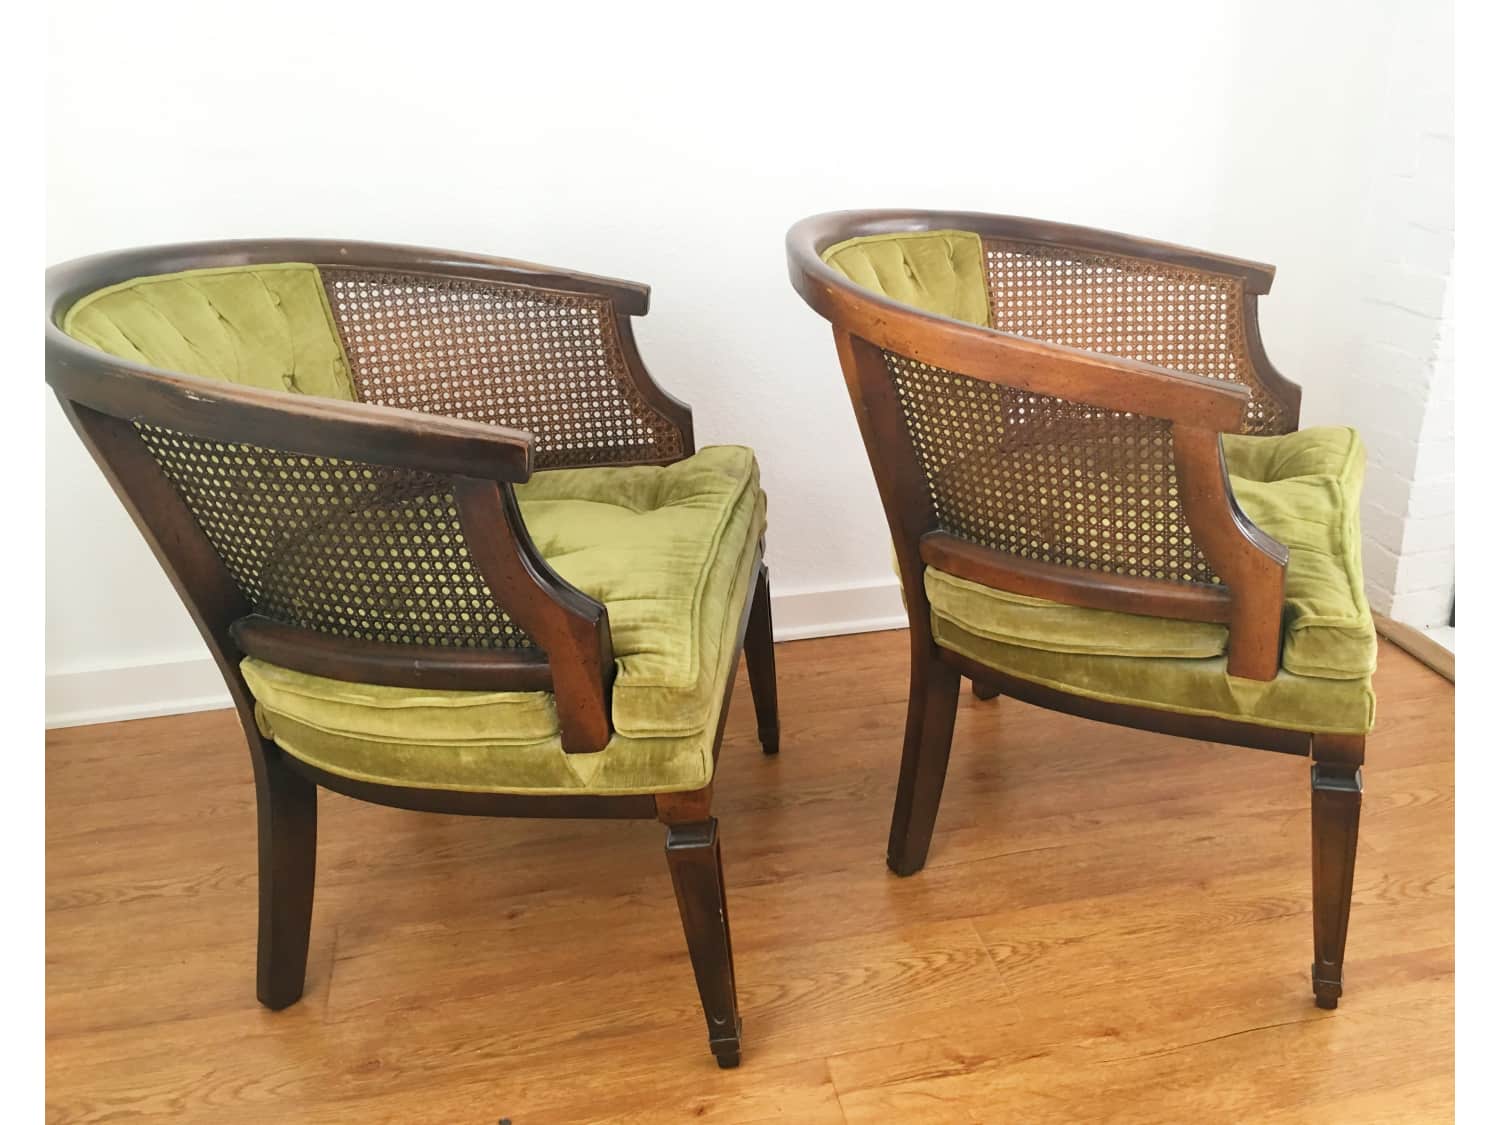 Pair of Vintage Cane Back and Velvet Barrel Chairs - Apartment Therapy